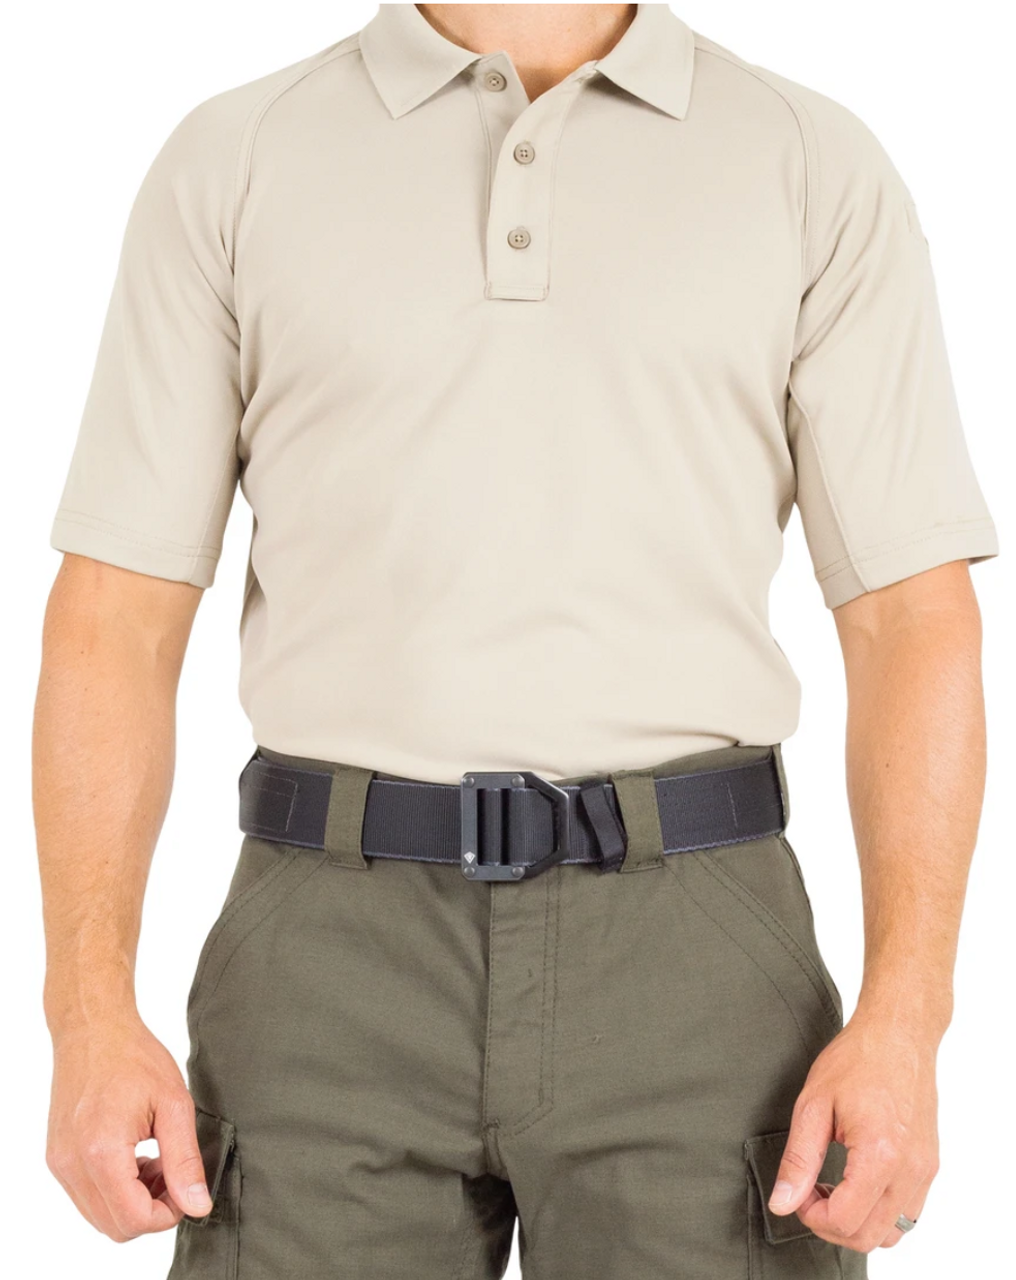 This versatile tactical polo, with superior fabric, fit, and features is the go-to shirt for active professionals. First Tactical’s Performance Short Sleeve Polo works as hard as you do, while maintaining a great look that will hold up under all conditions.